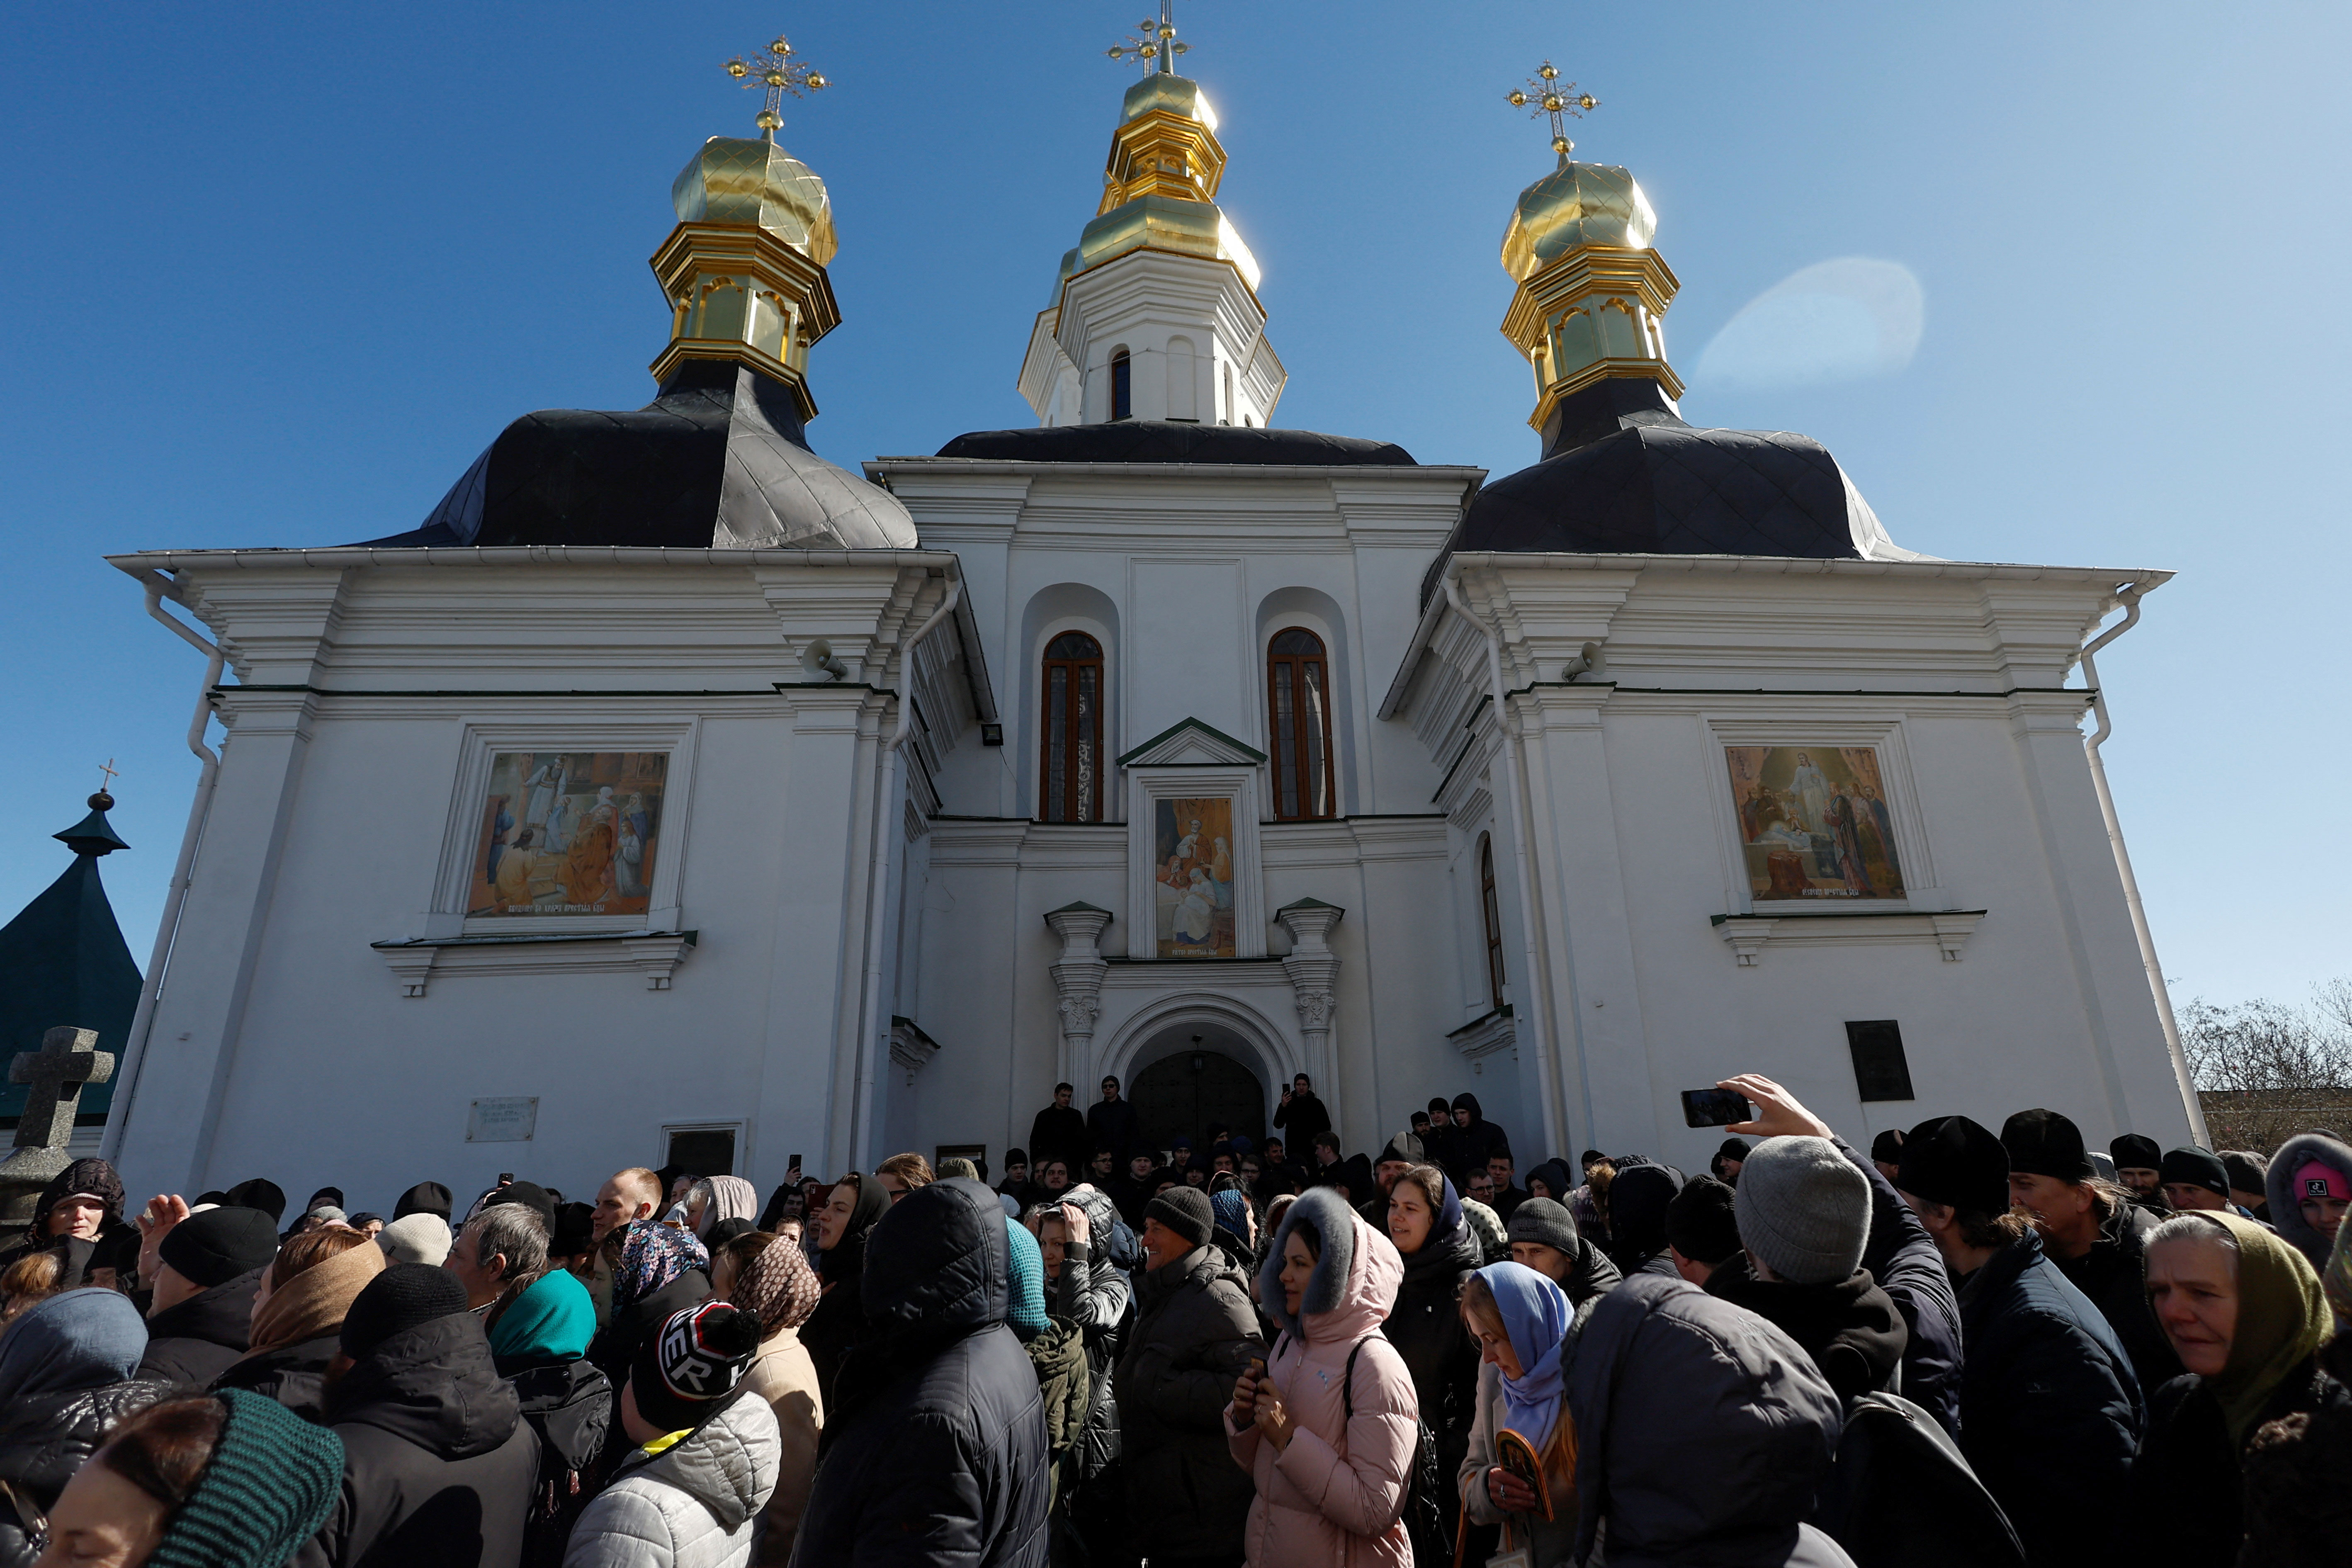 Believers of the Ukrainian Orthodox Church block the entrance of the church during prayers in the compound of the Pechersk Lavra in Kiev, Kiev, on March 30. 